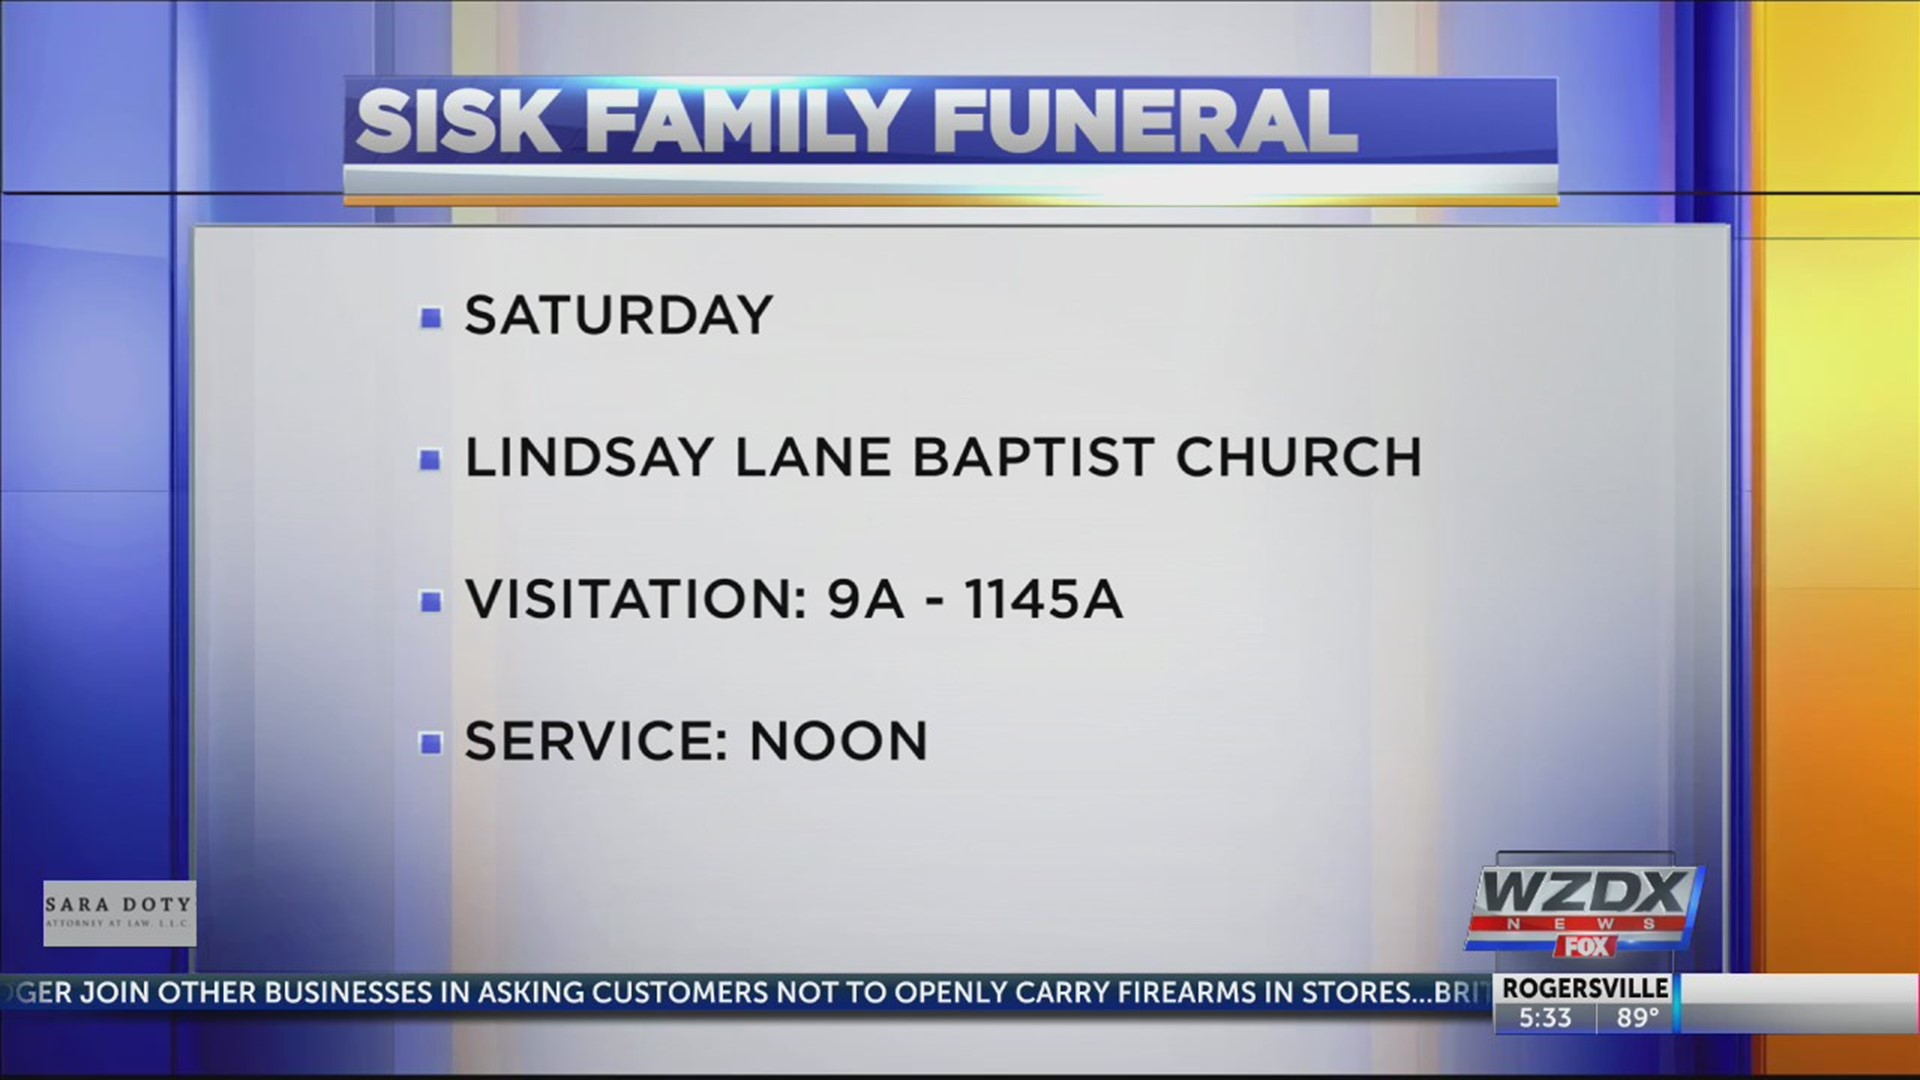 The Sisk family will be laid to rest this Saturday.